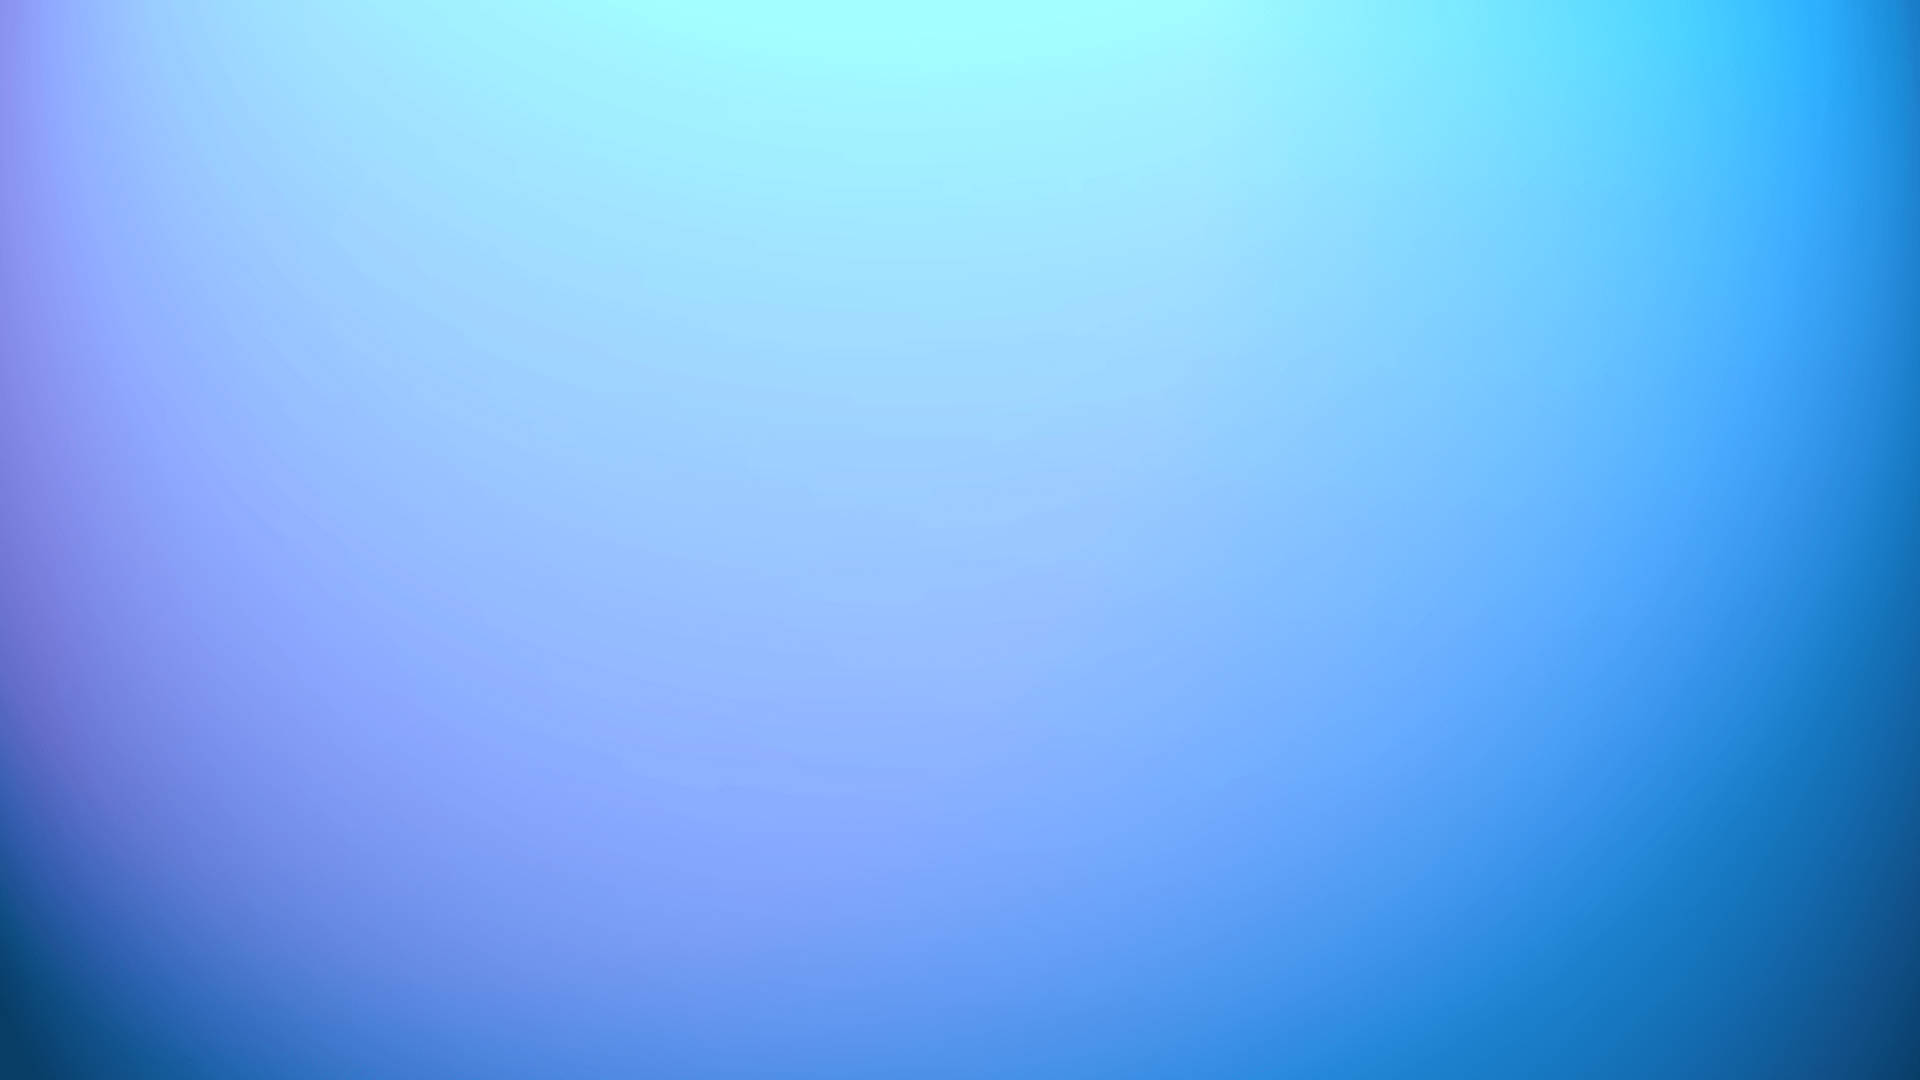 Free Blue Wallpaper Downloads, [1700+] Blue Wallpapers for FREE | Wallpapers .com